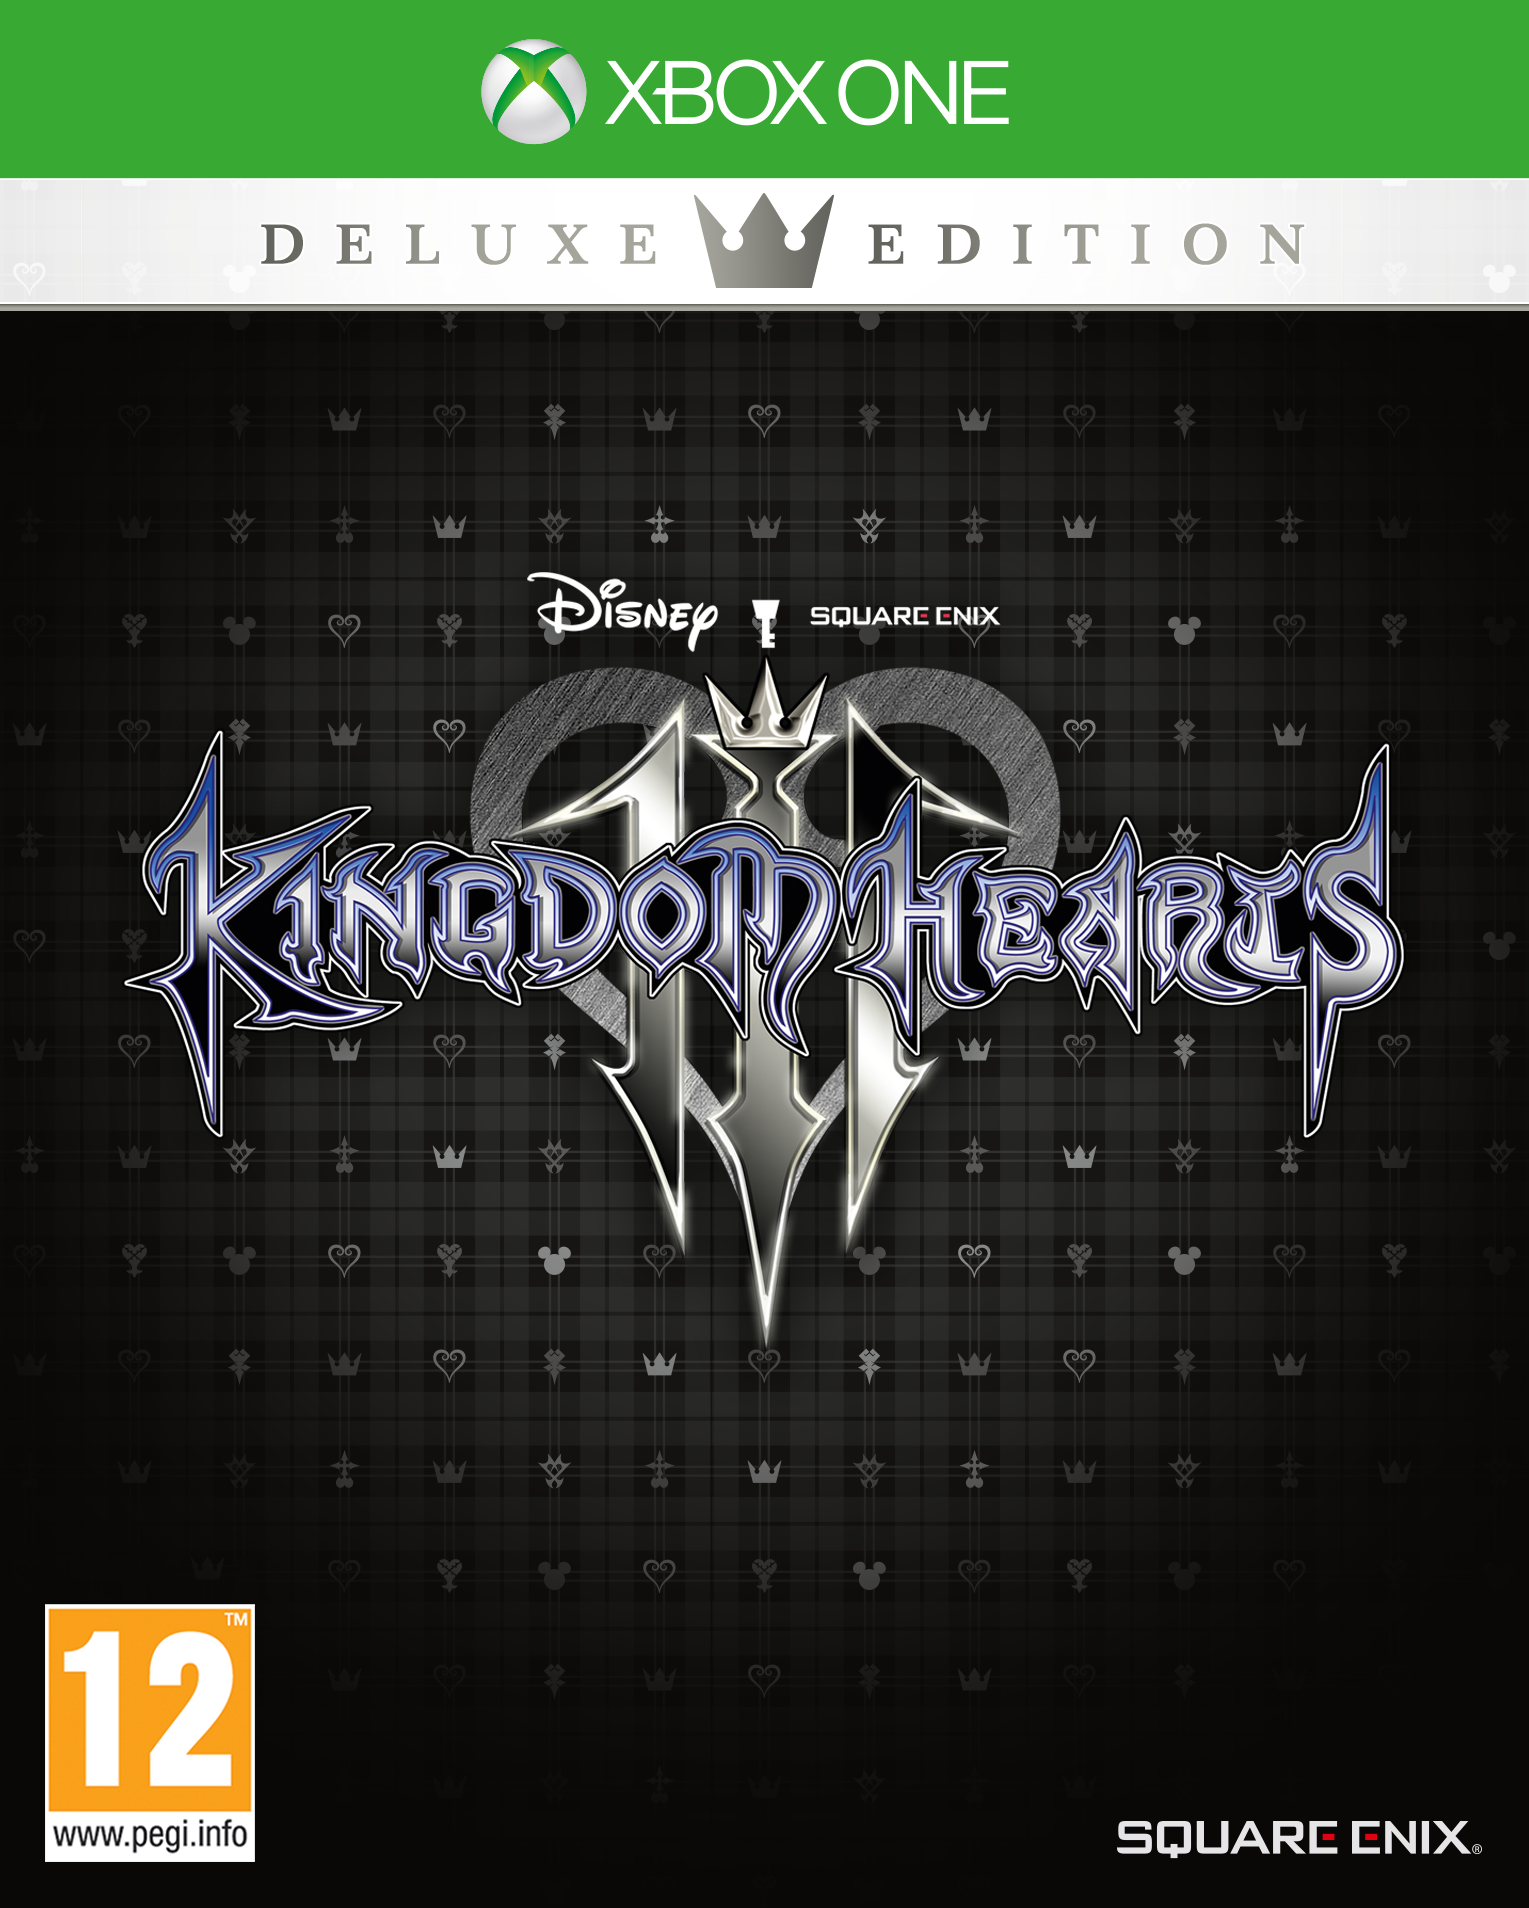 what does the deluxe edition of kingdom hearts 3 come with